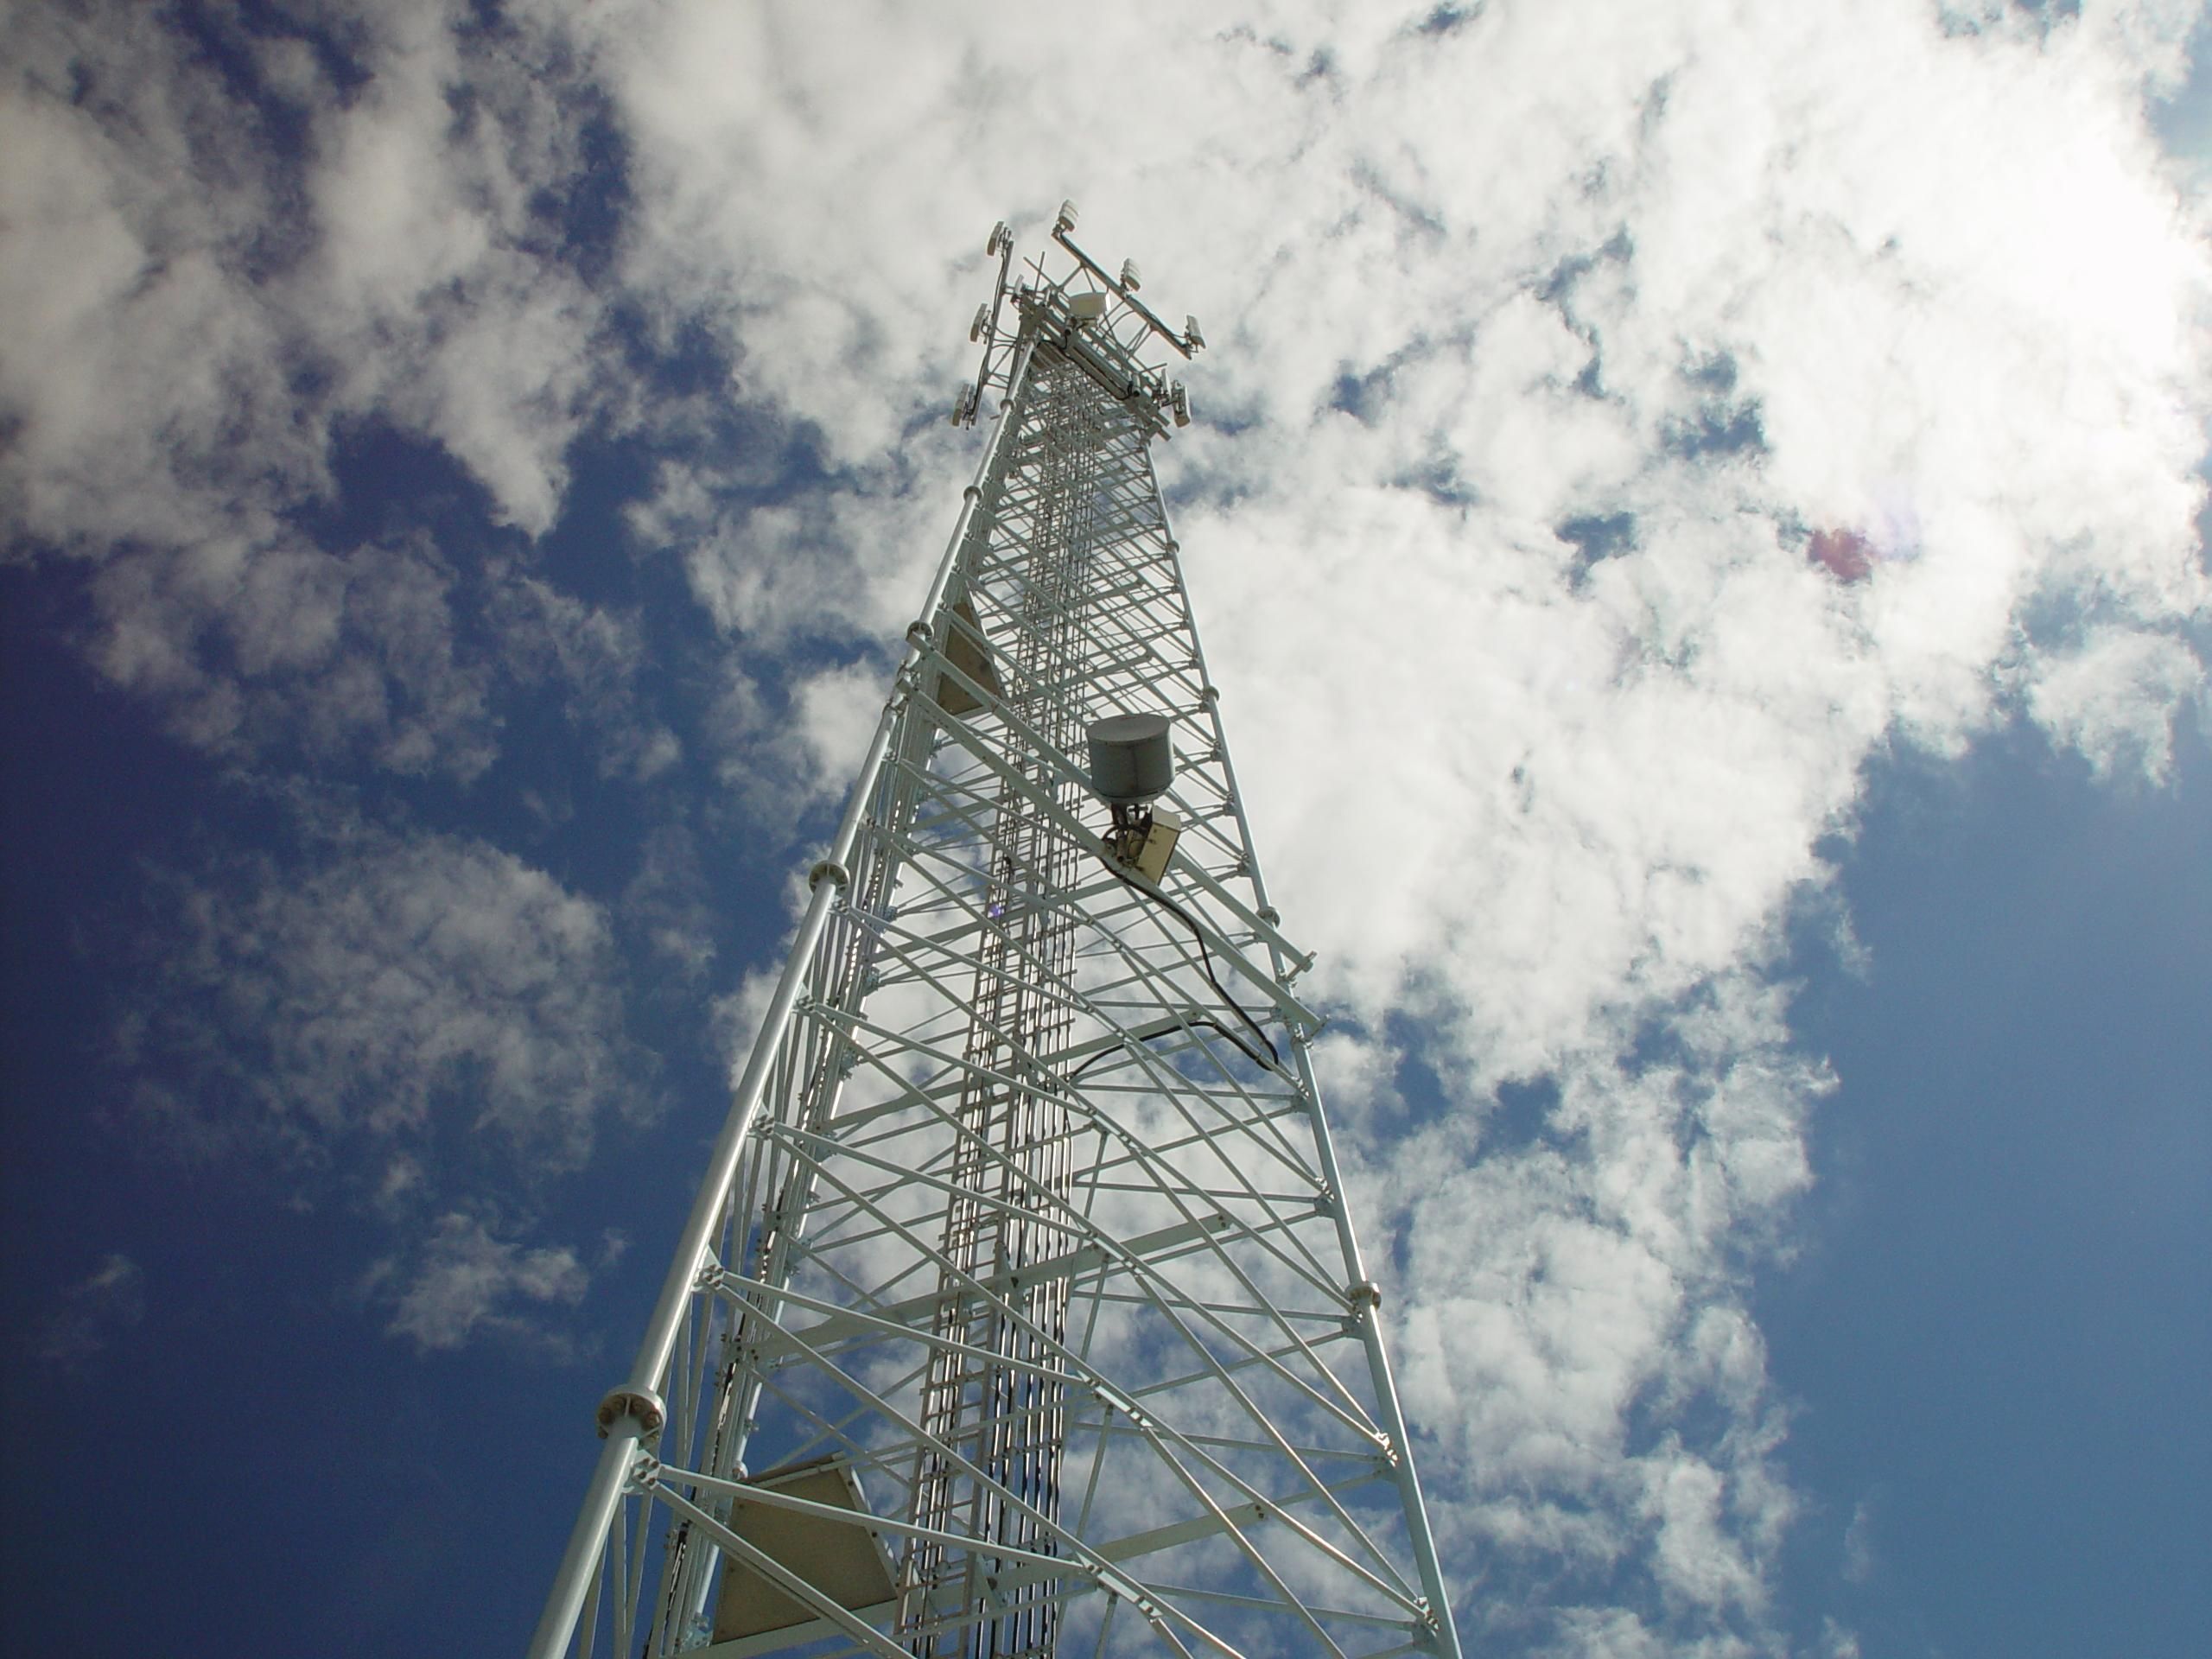 Communications tower reaching for the clouds